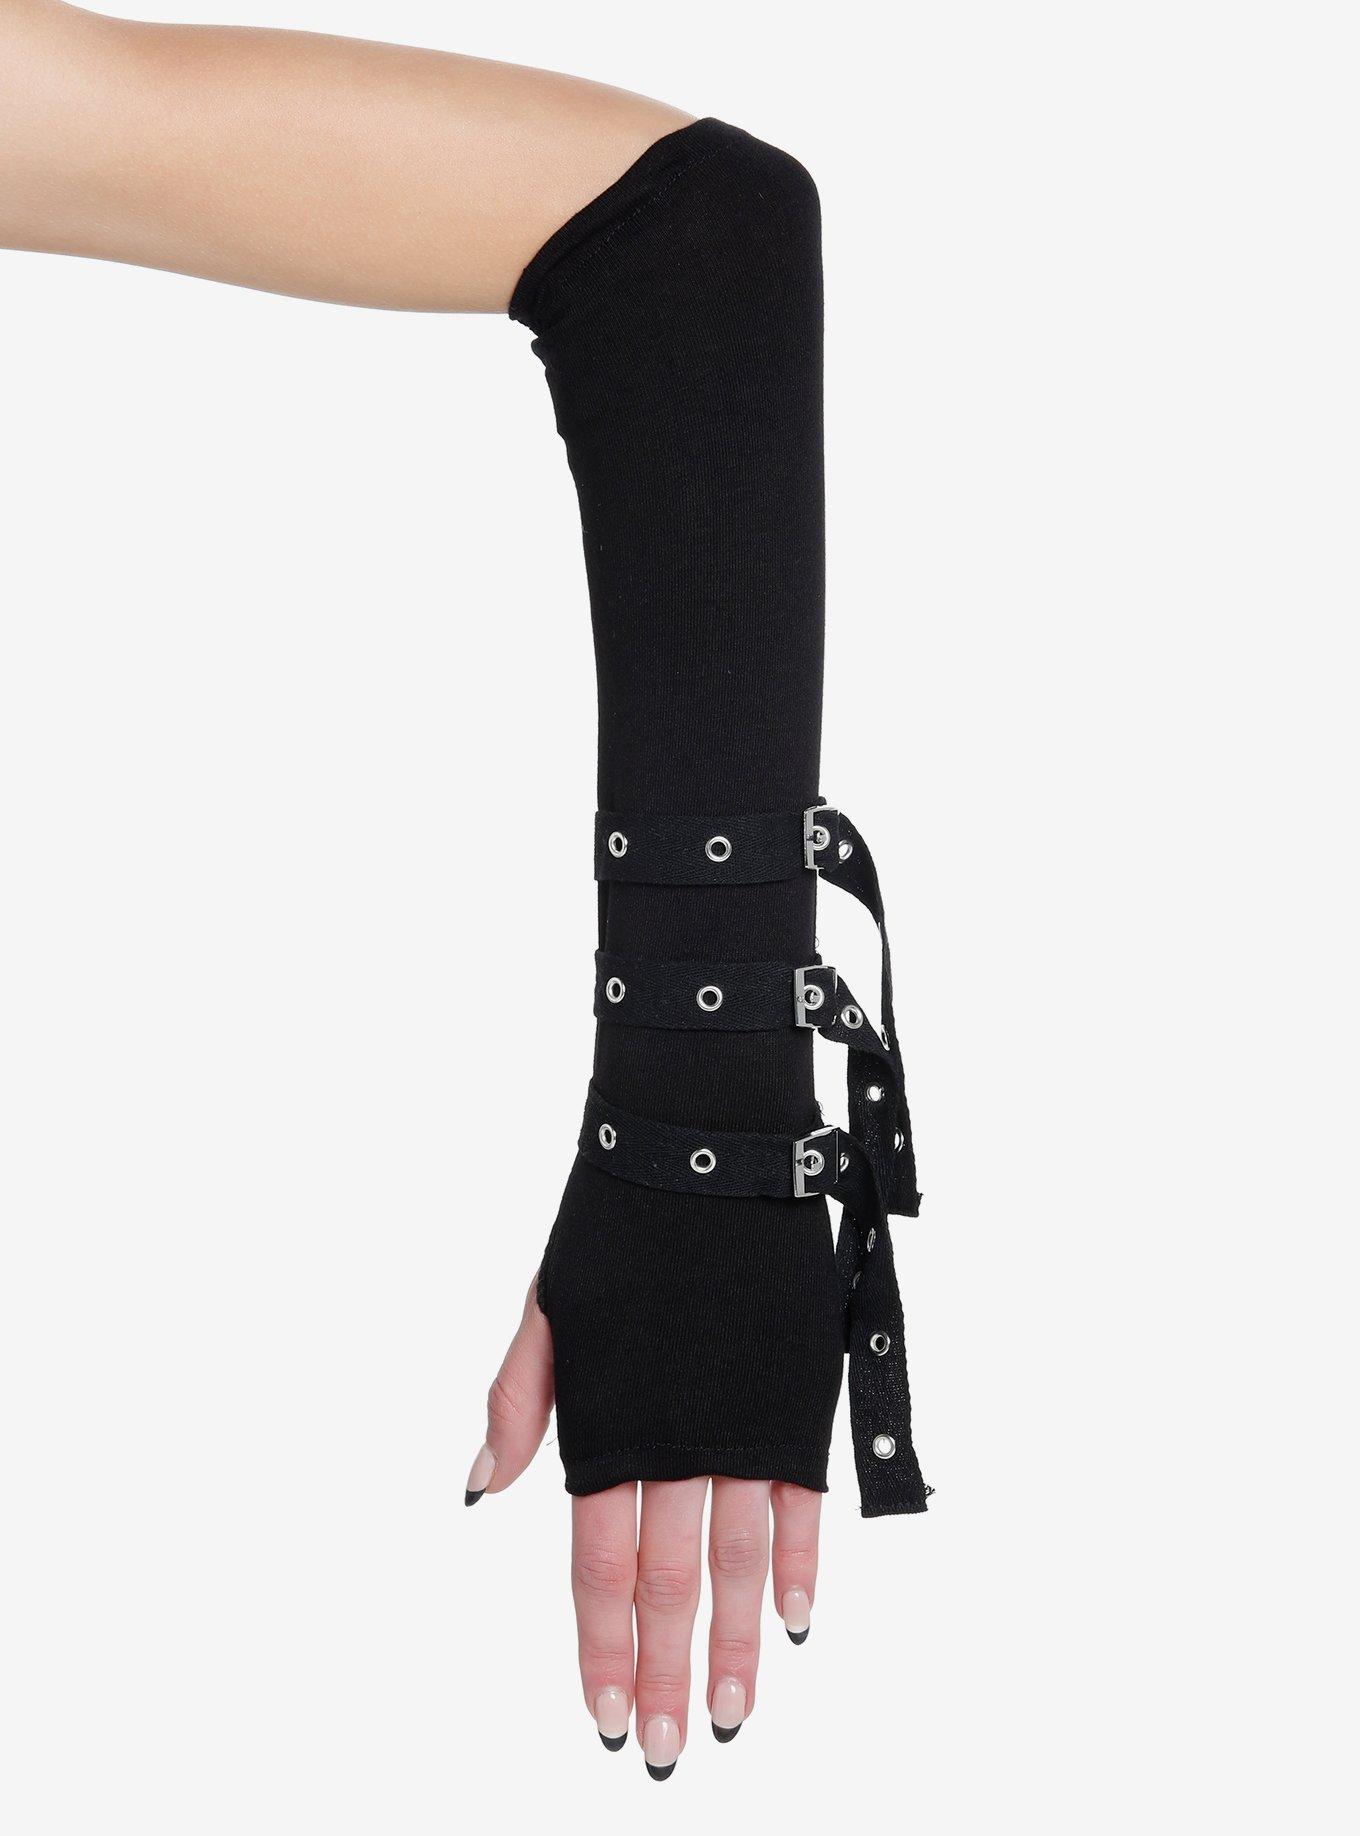 Black Grommet Strappy Arm Warmers